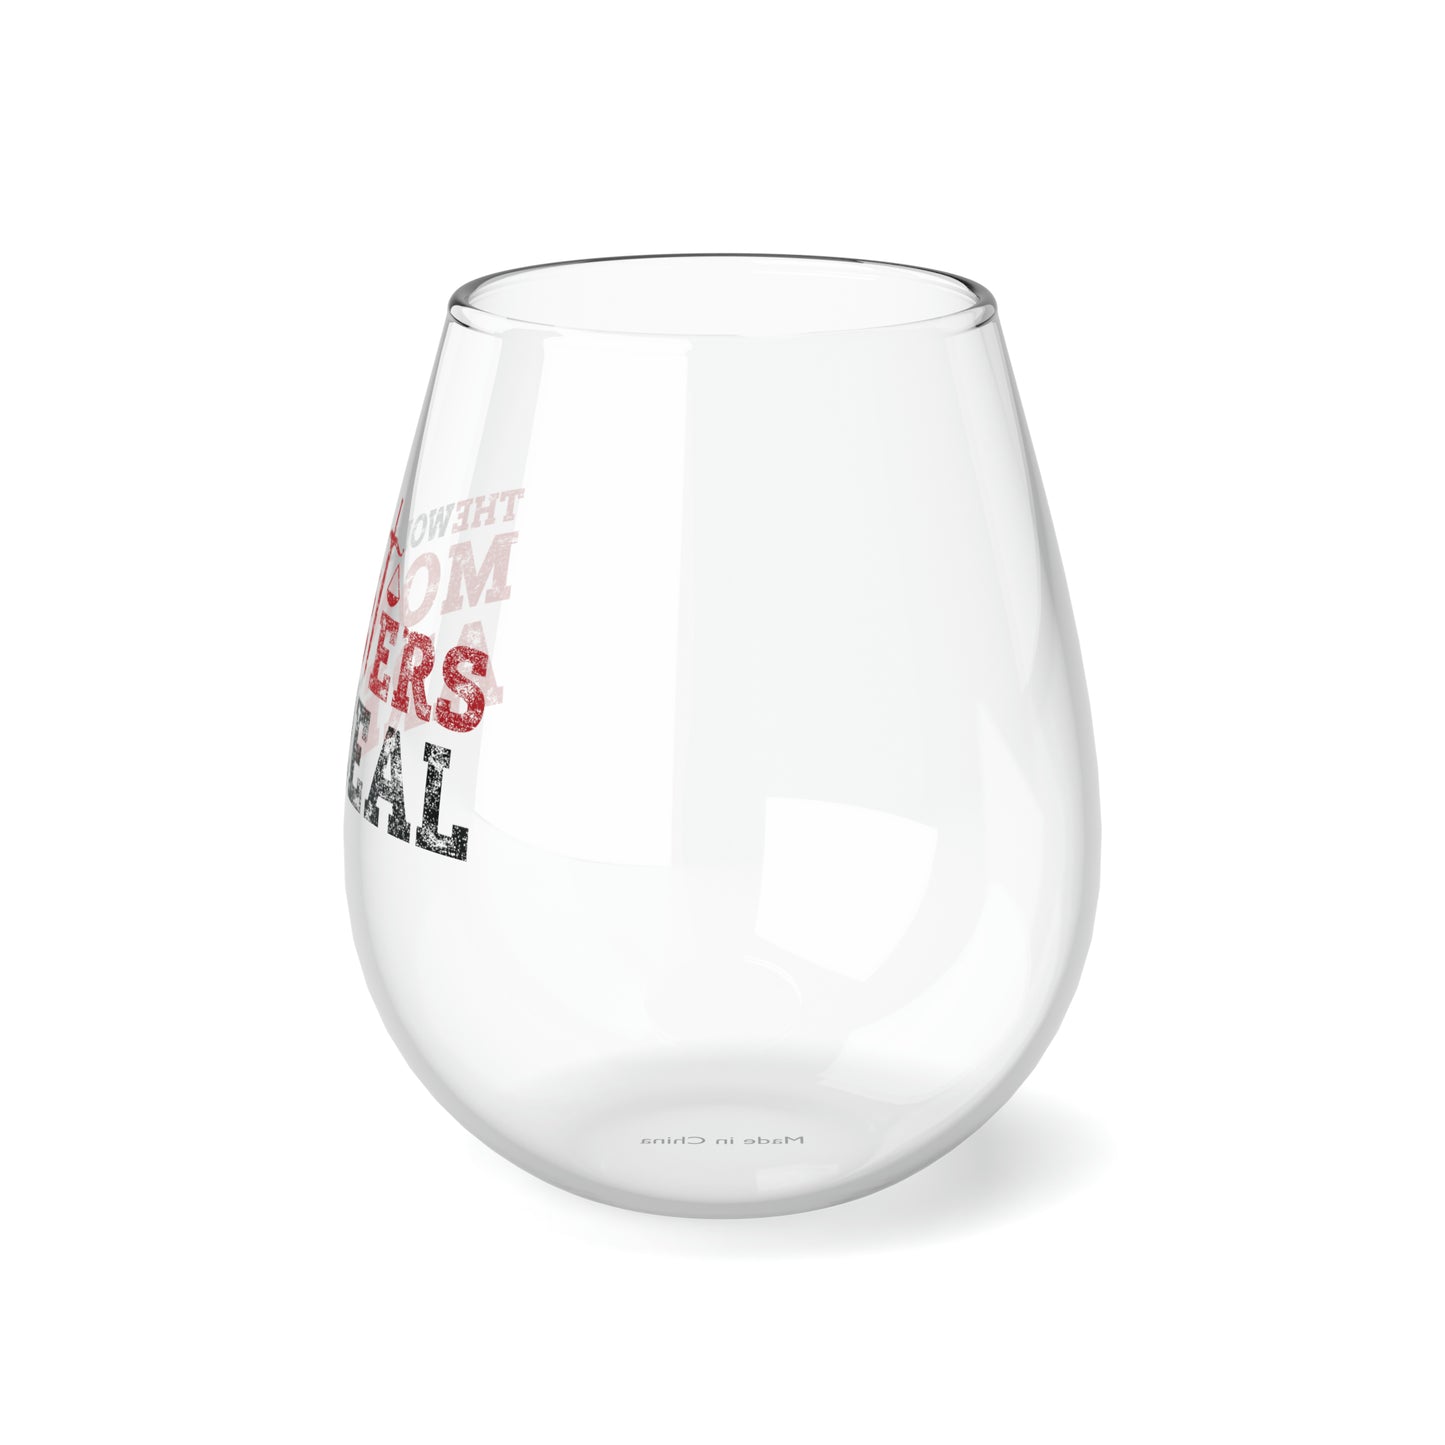 "The Worst Monsters" Stemless Wine Glass, 11.75oz